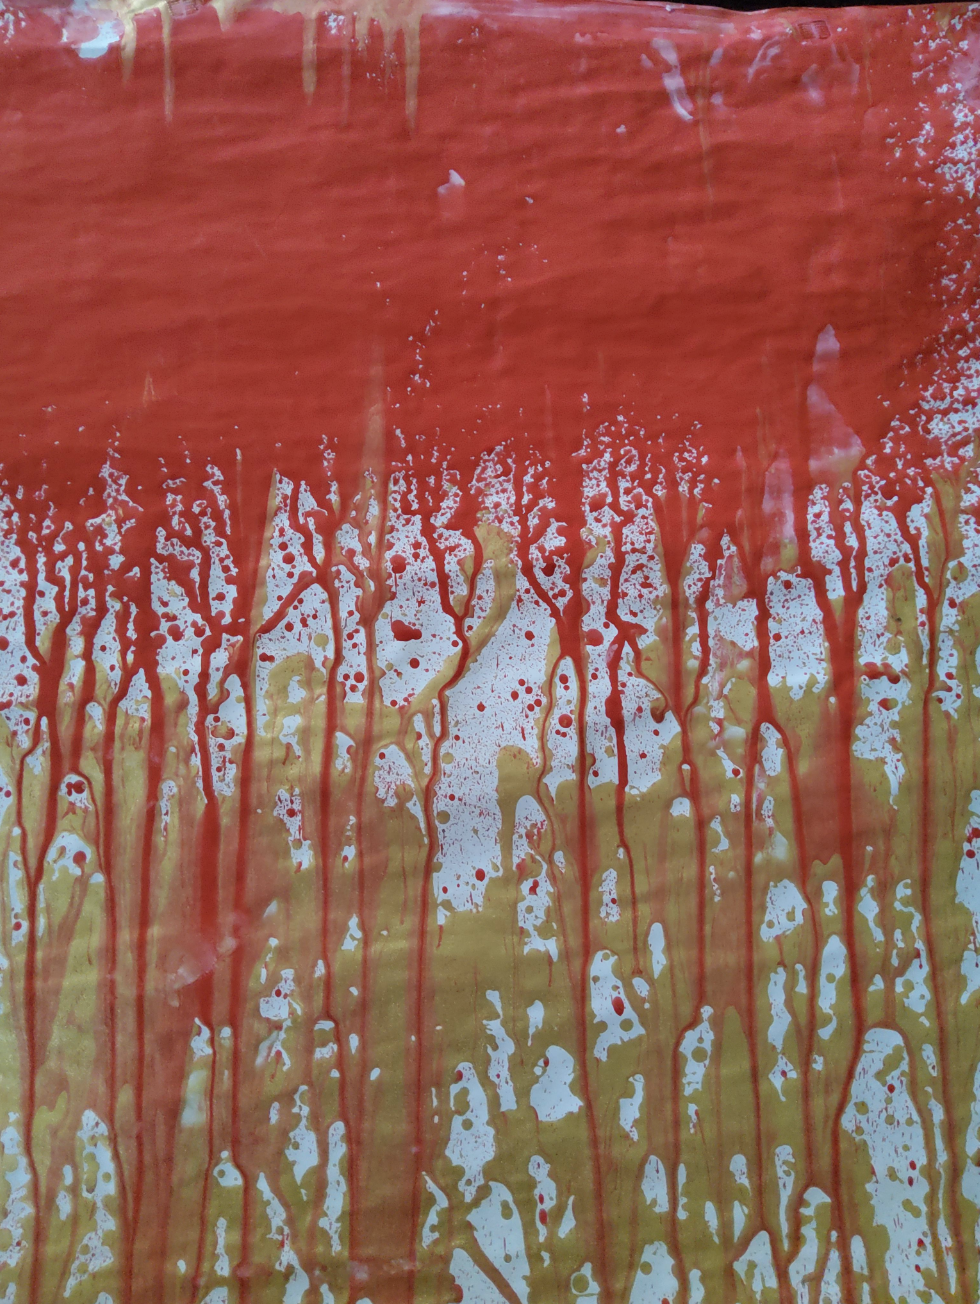 A painting that appears to be blood dripping